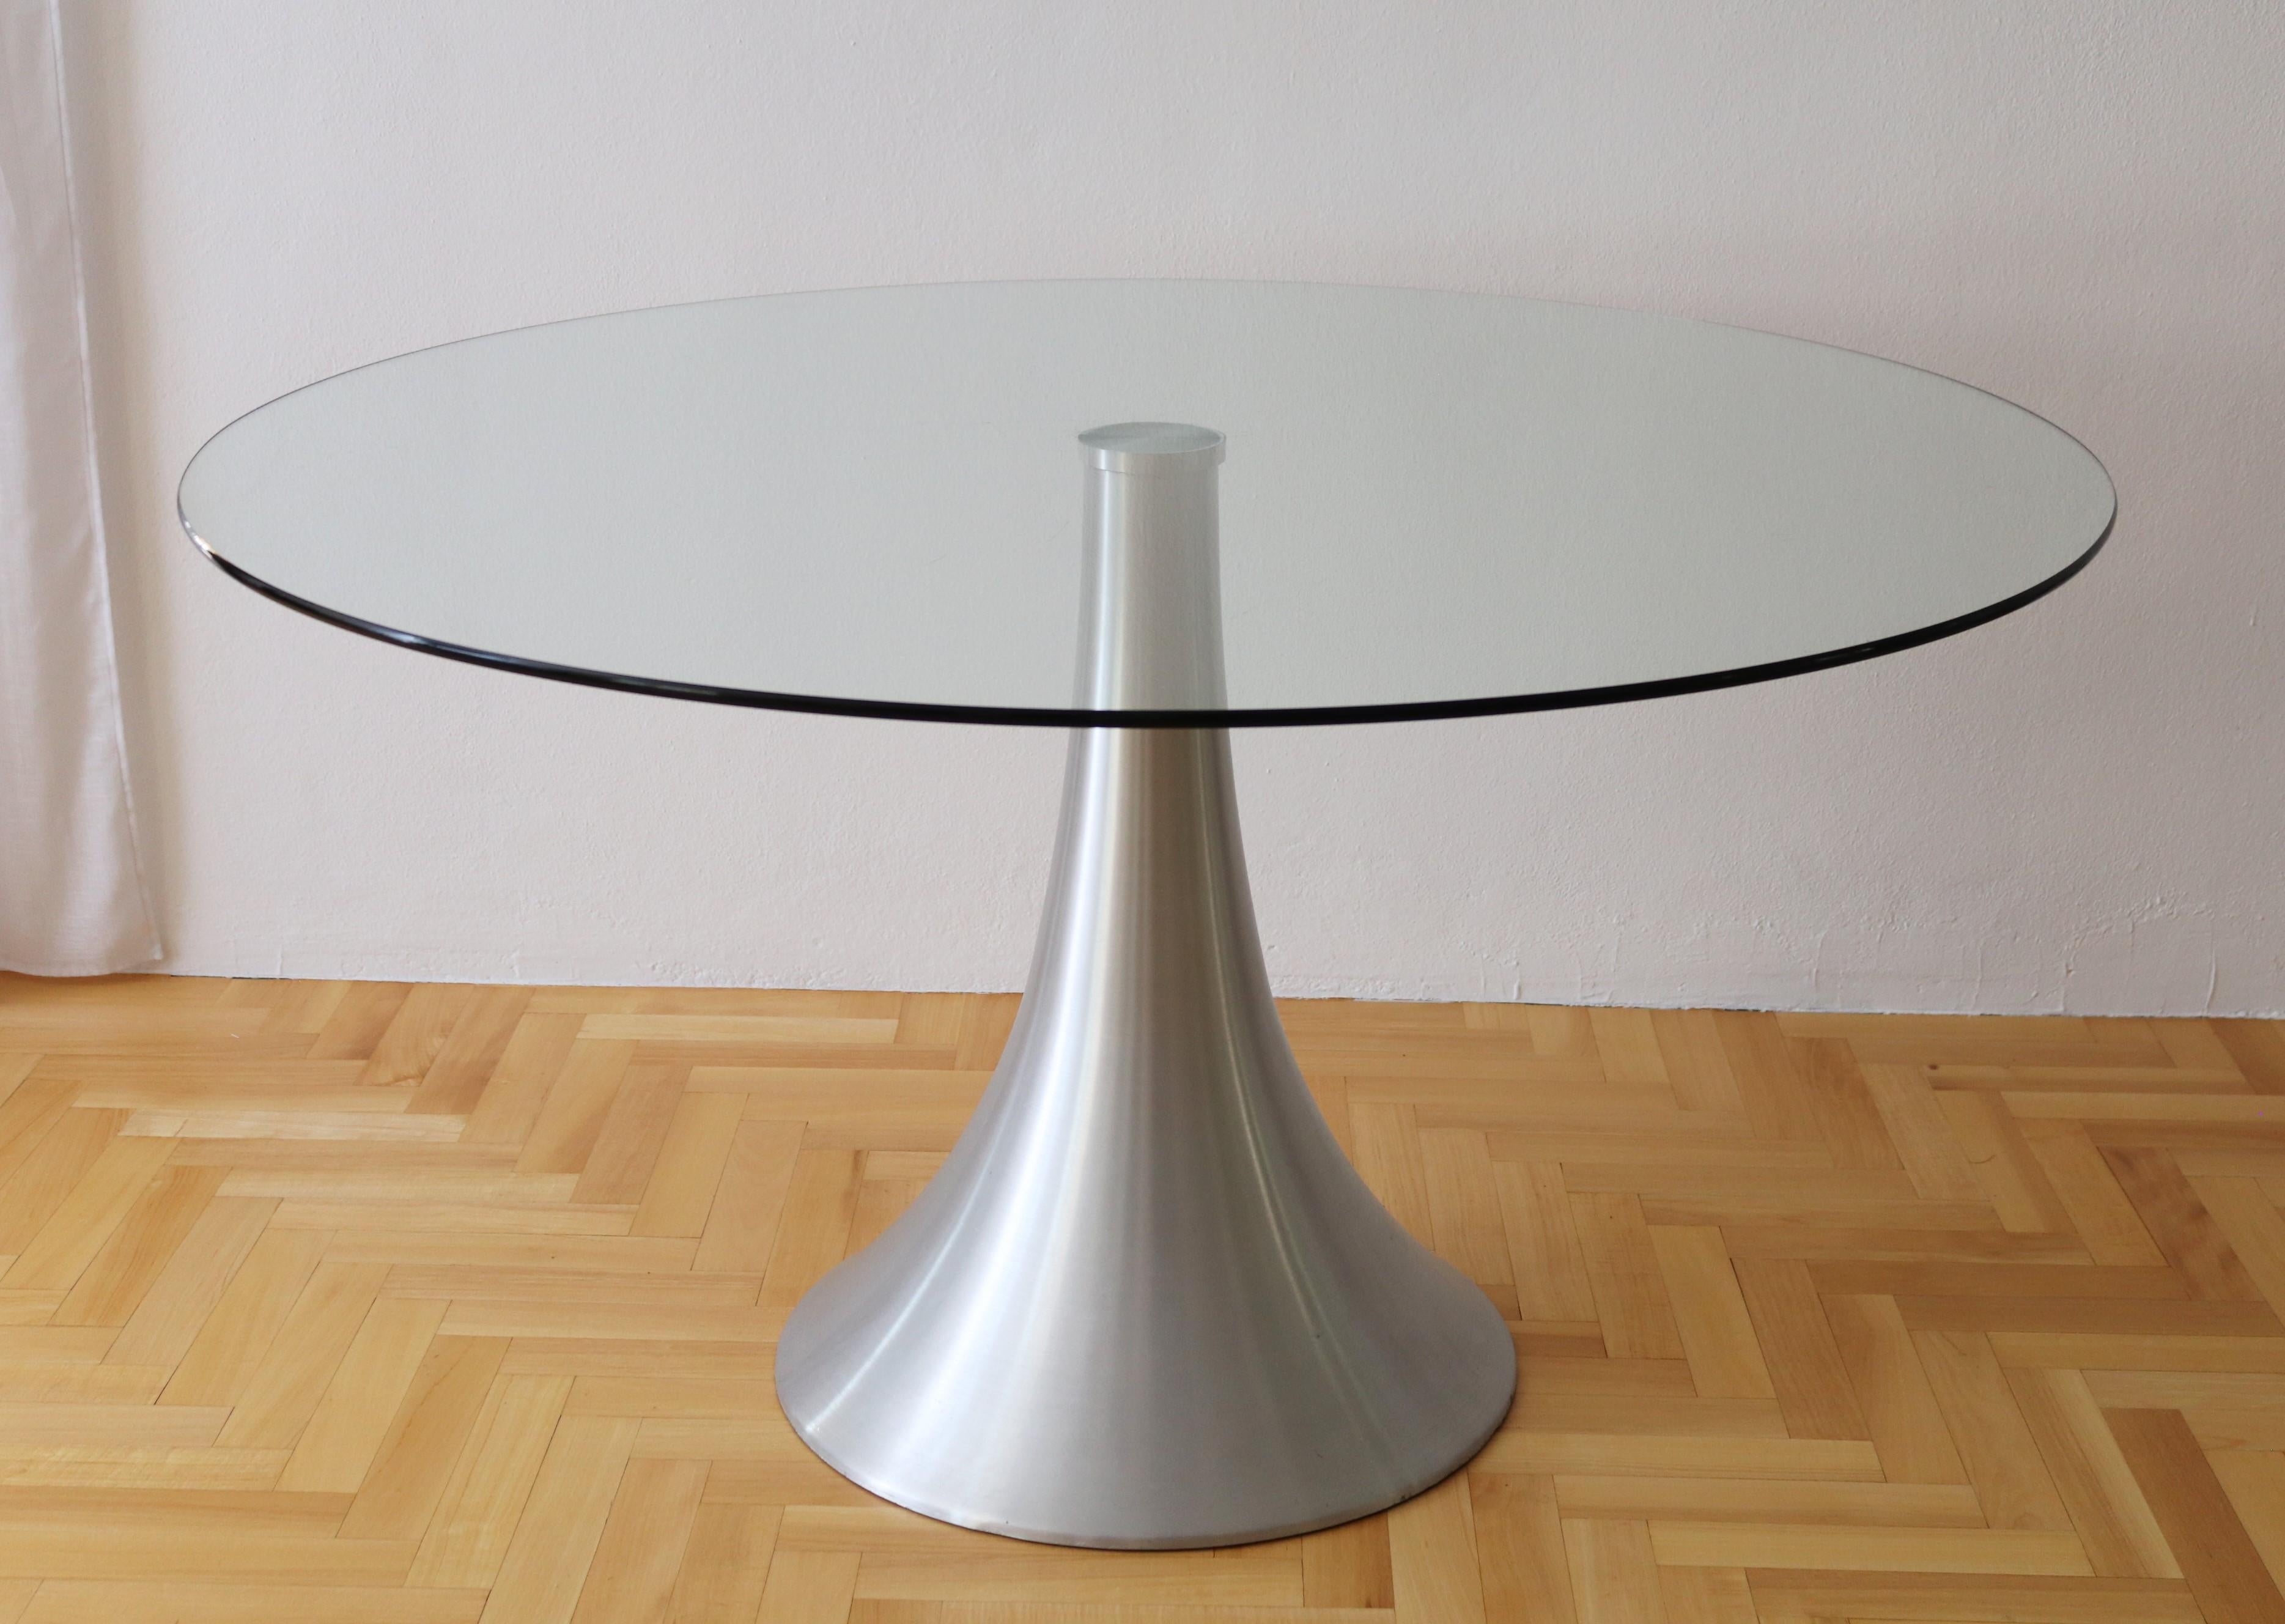 Beautiful dining table back from the 1970s made of strong aluminium base in tulip shape with round glass top.
Made in Italy during the 1970s.
The tulip base has some small signs on the base (see pictures) and few light normal scratches on the